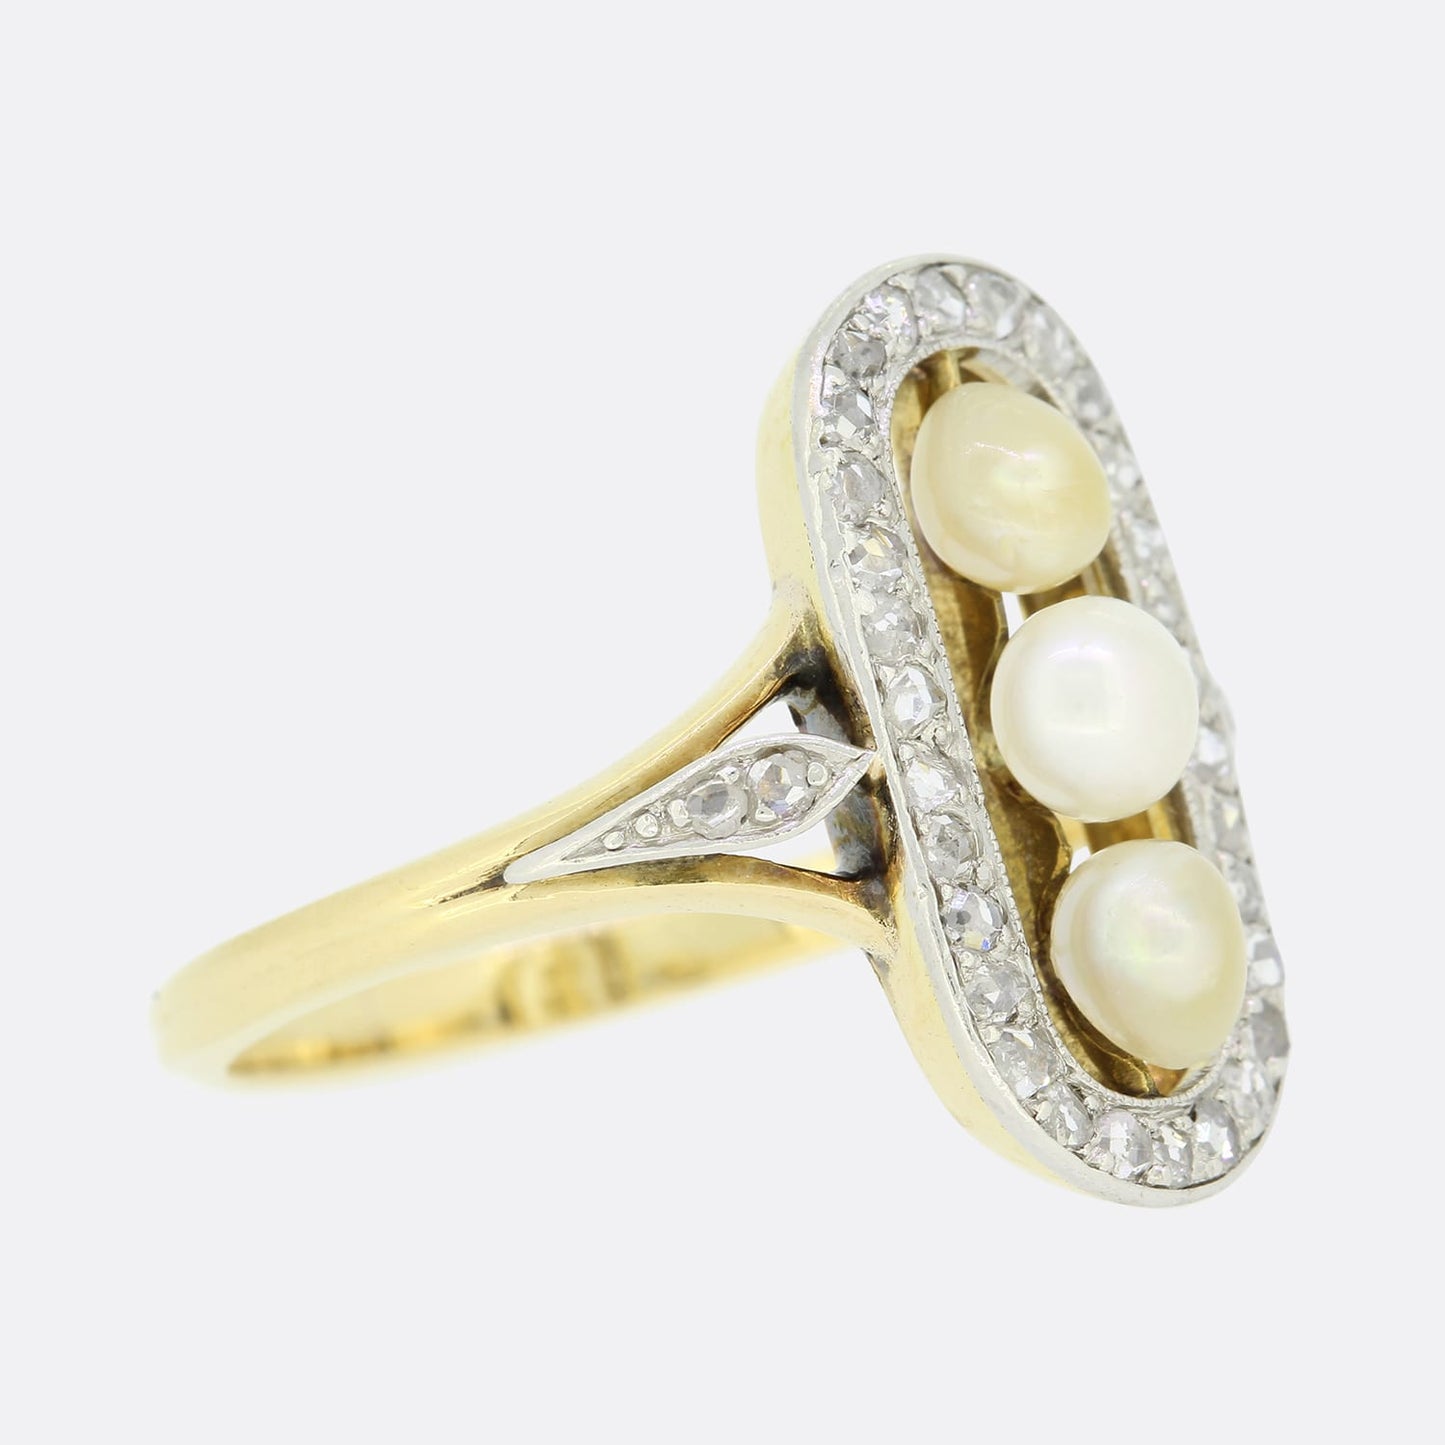 Edwardian Pearl and Diamond Tablet Ring